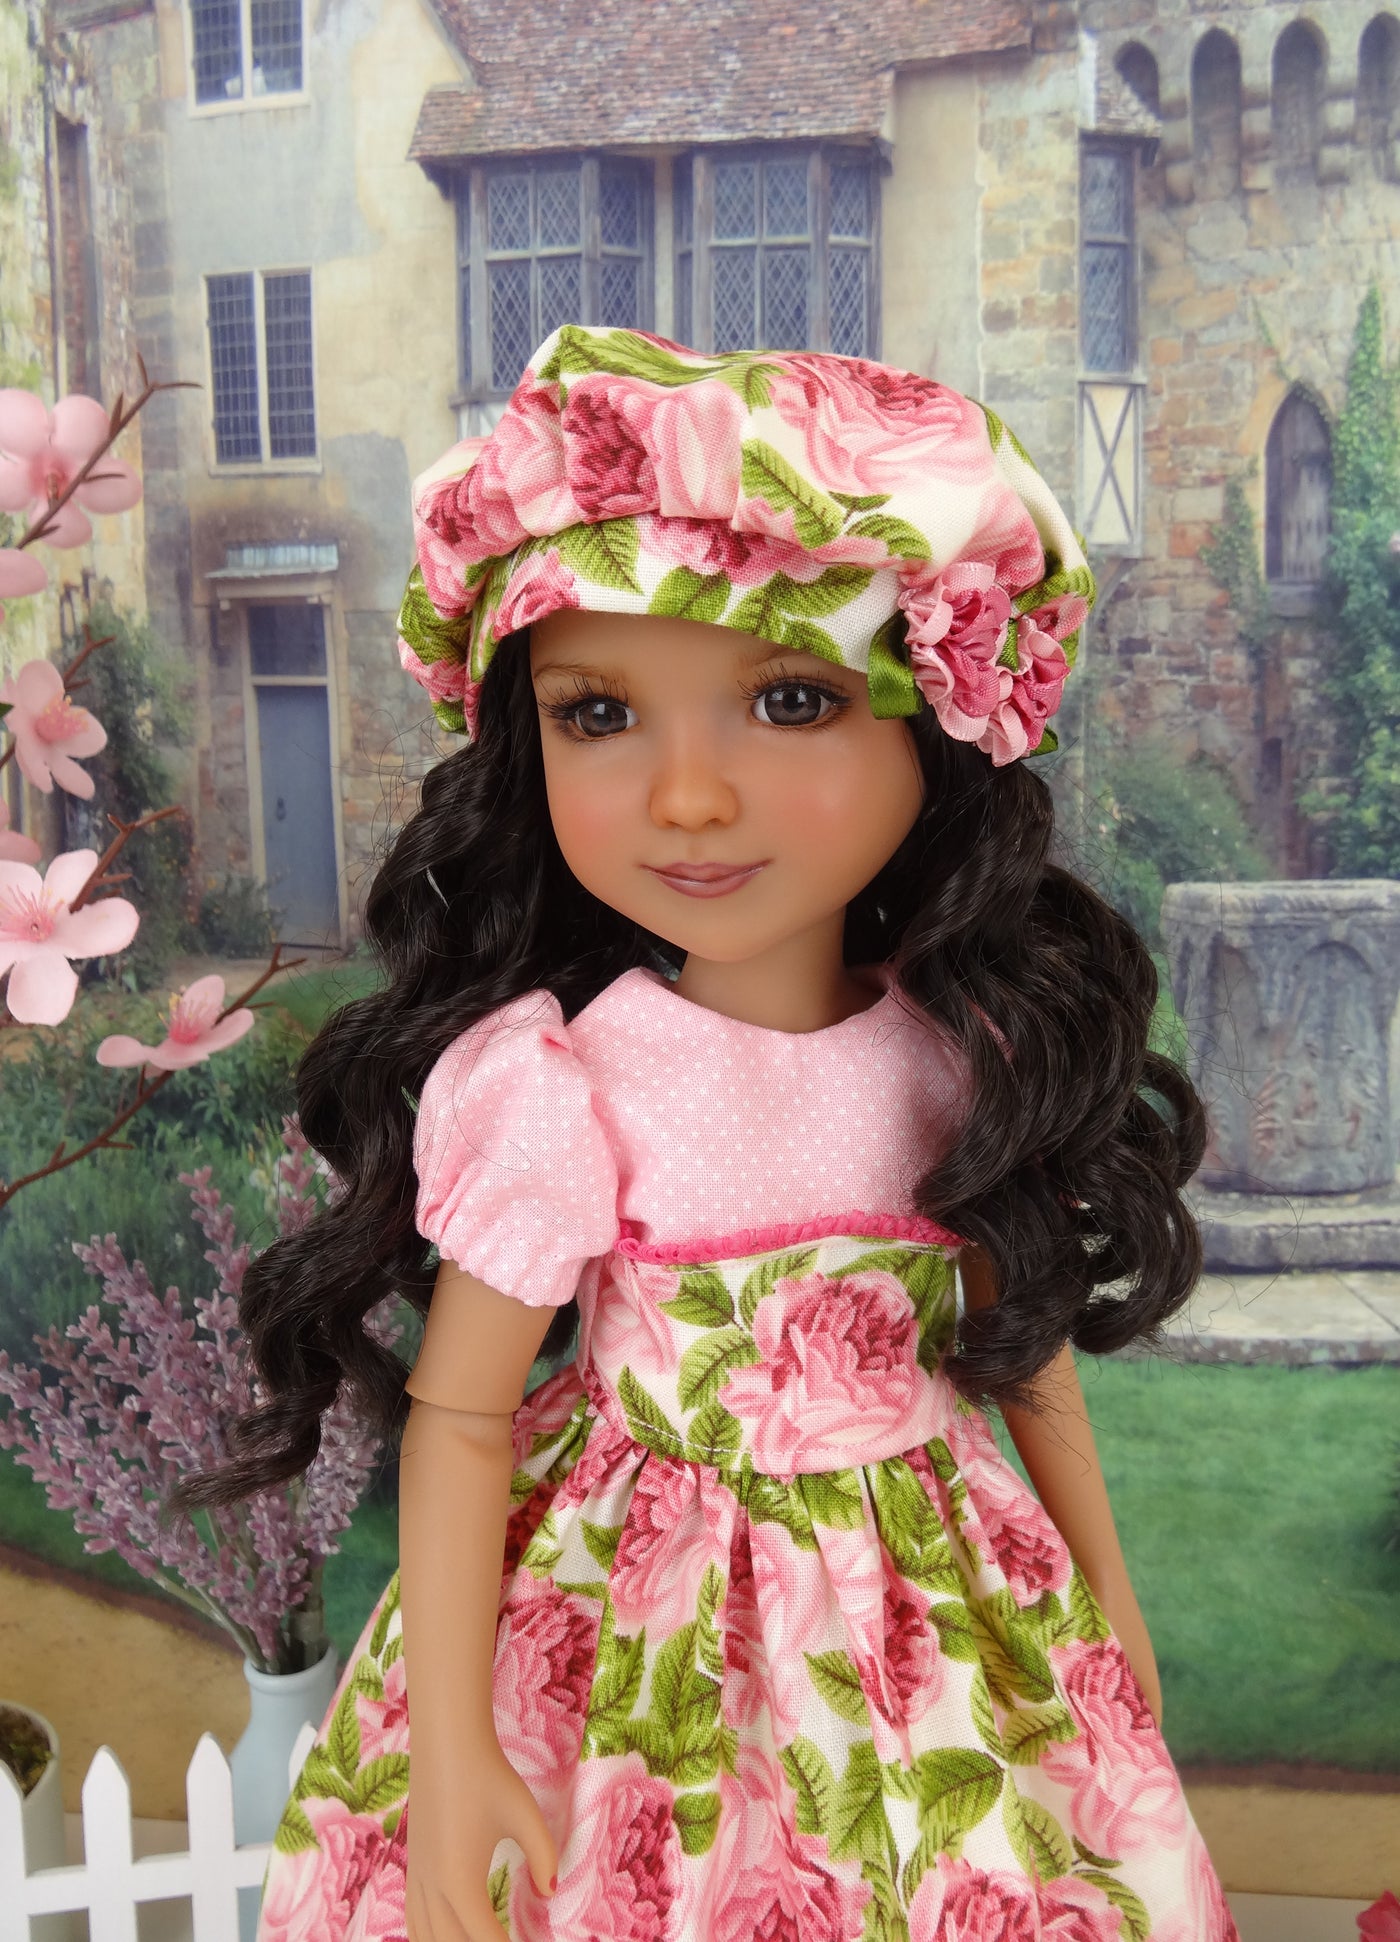 Provence Rose - dress and shoes for Ruby Red Fashion Friends doll